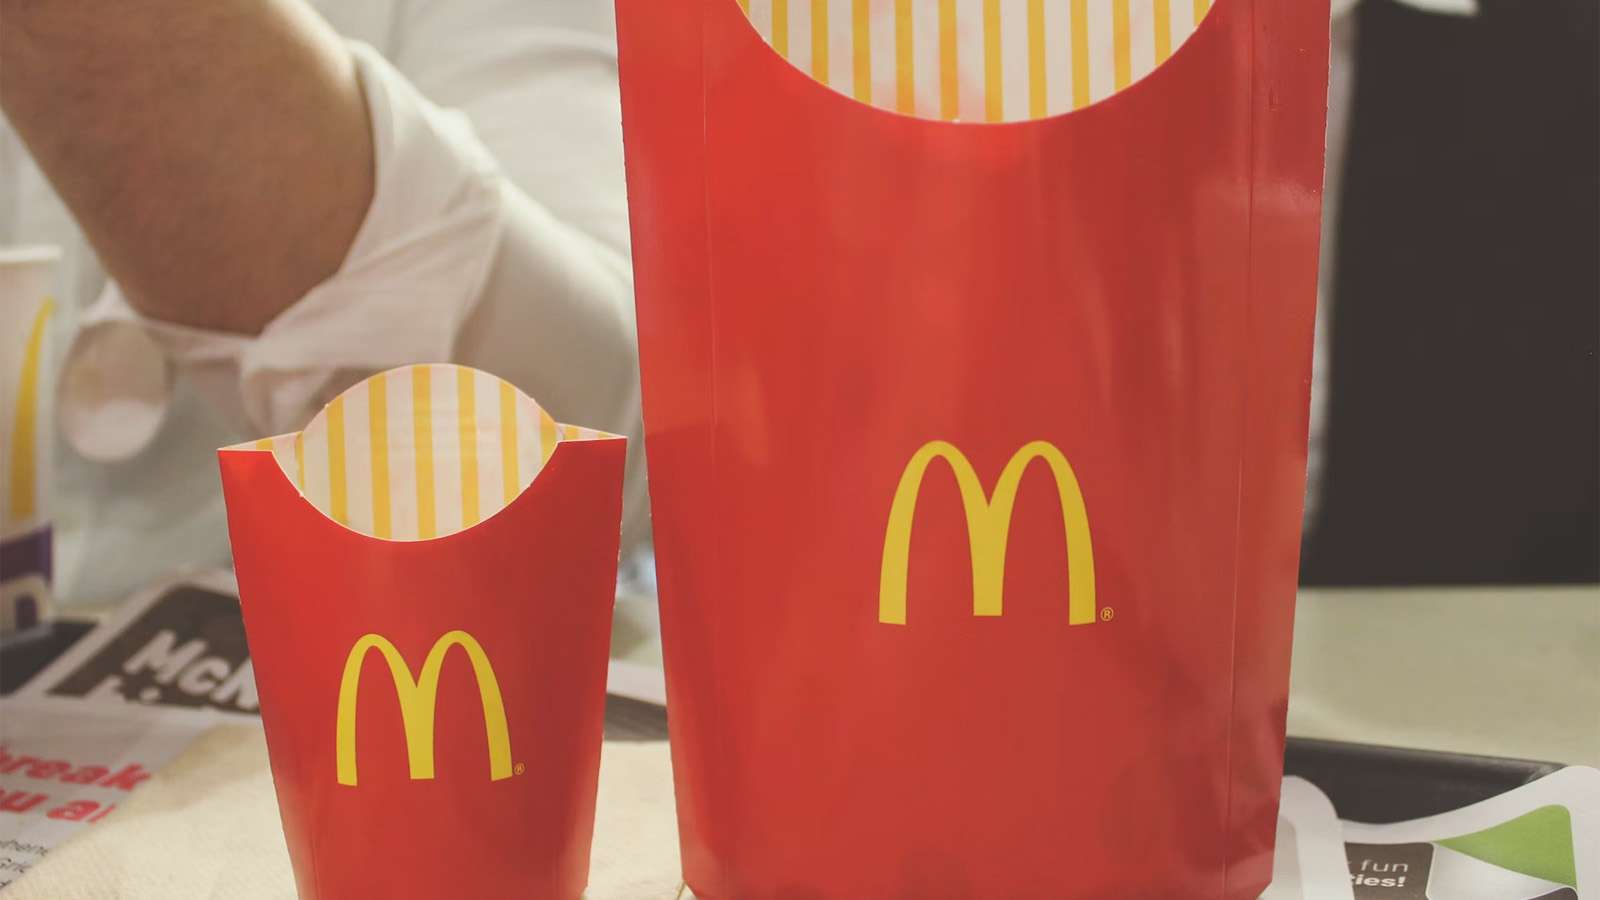 McDonald’s offers customers the chance to add free fries to every Friday order